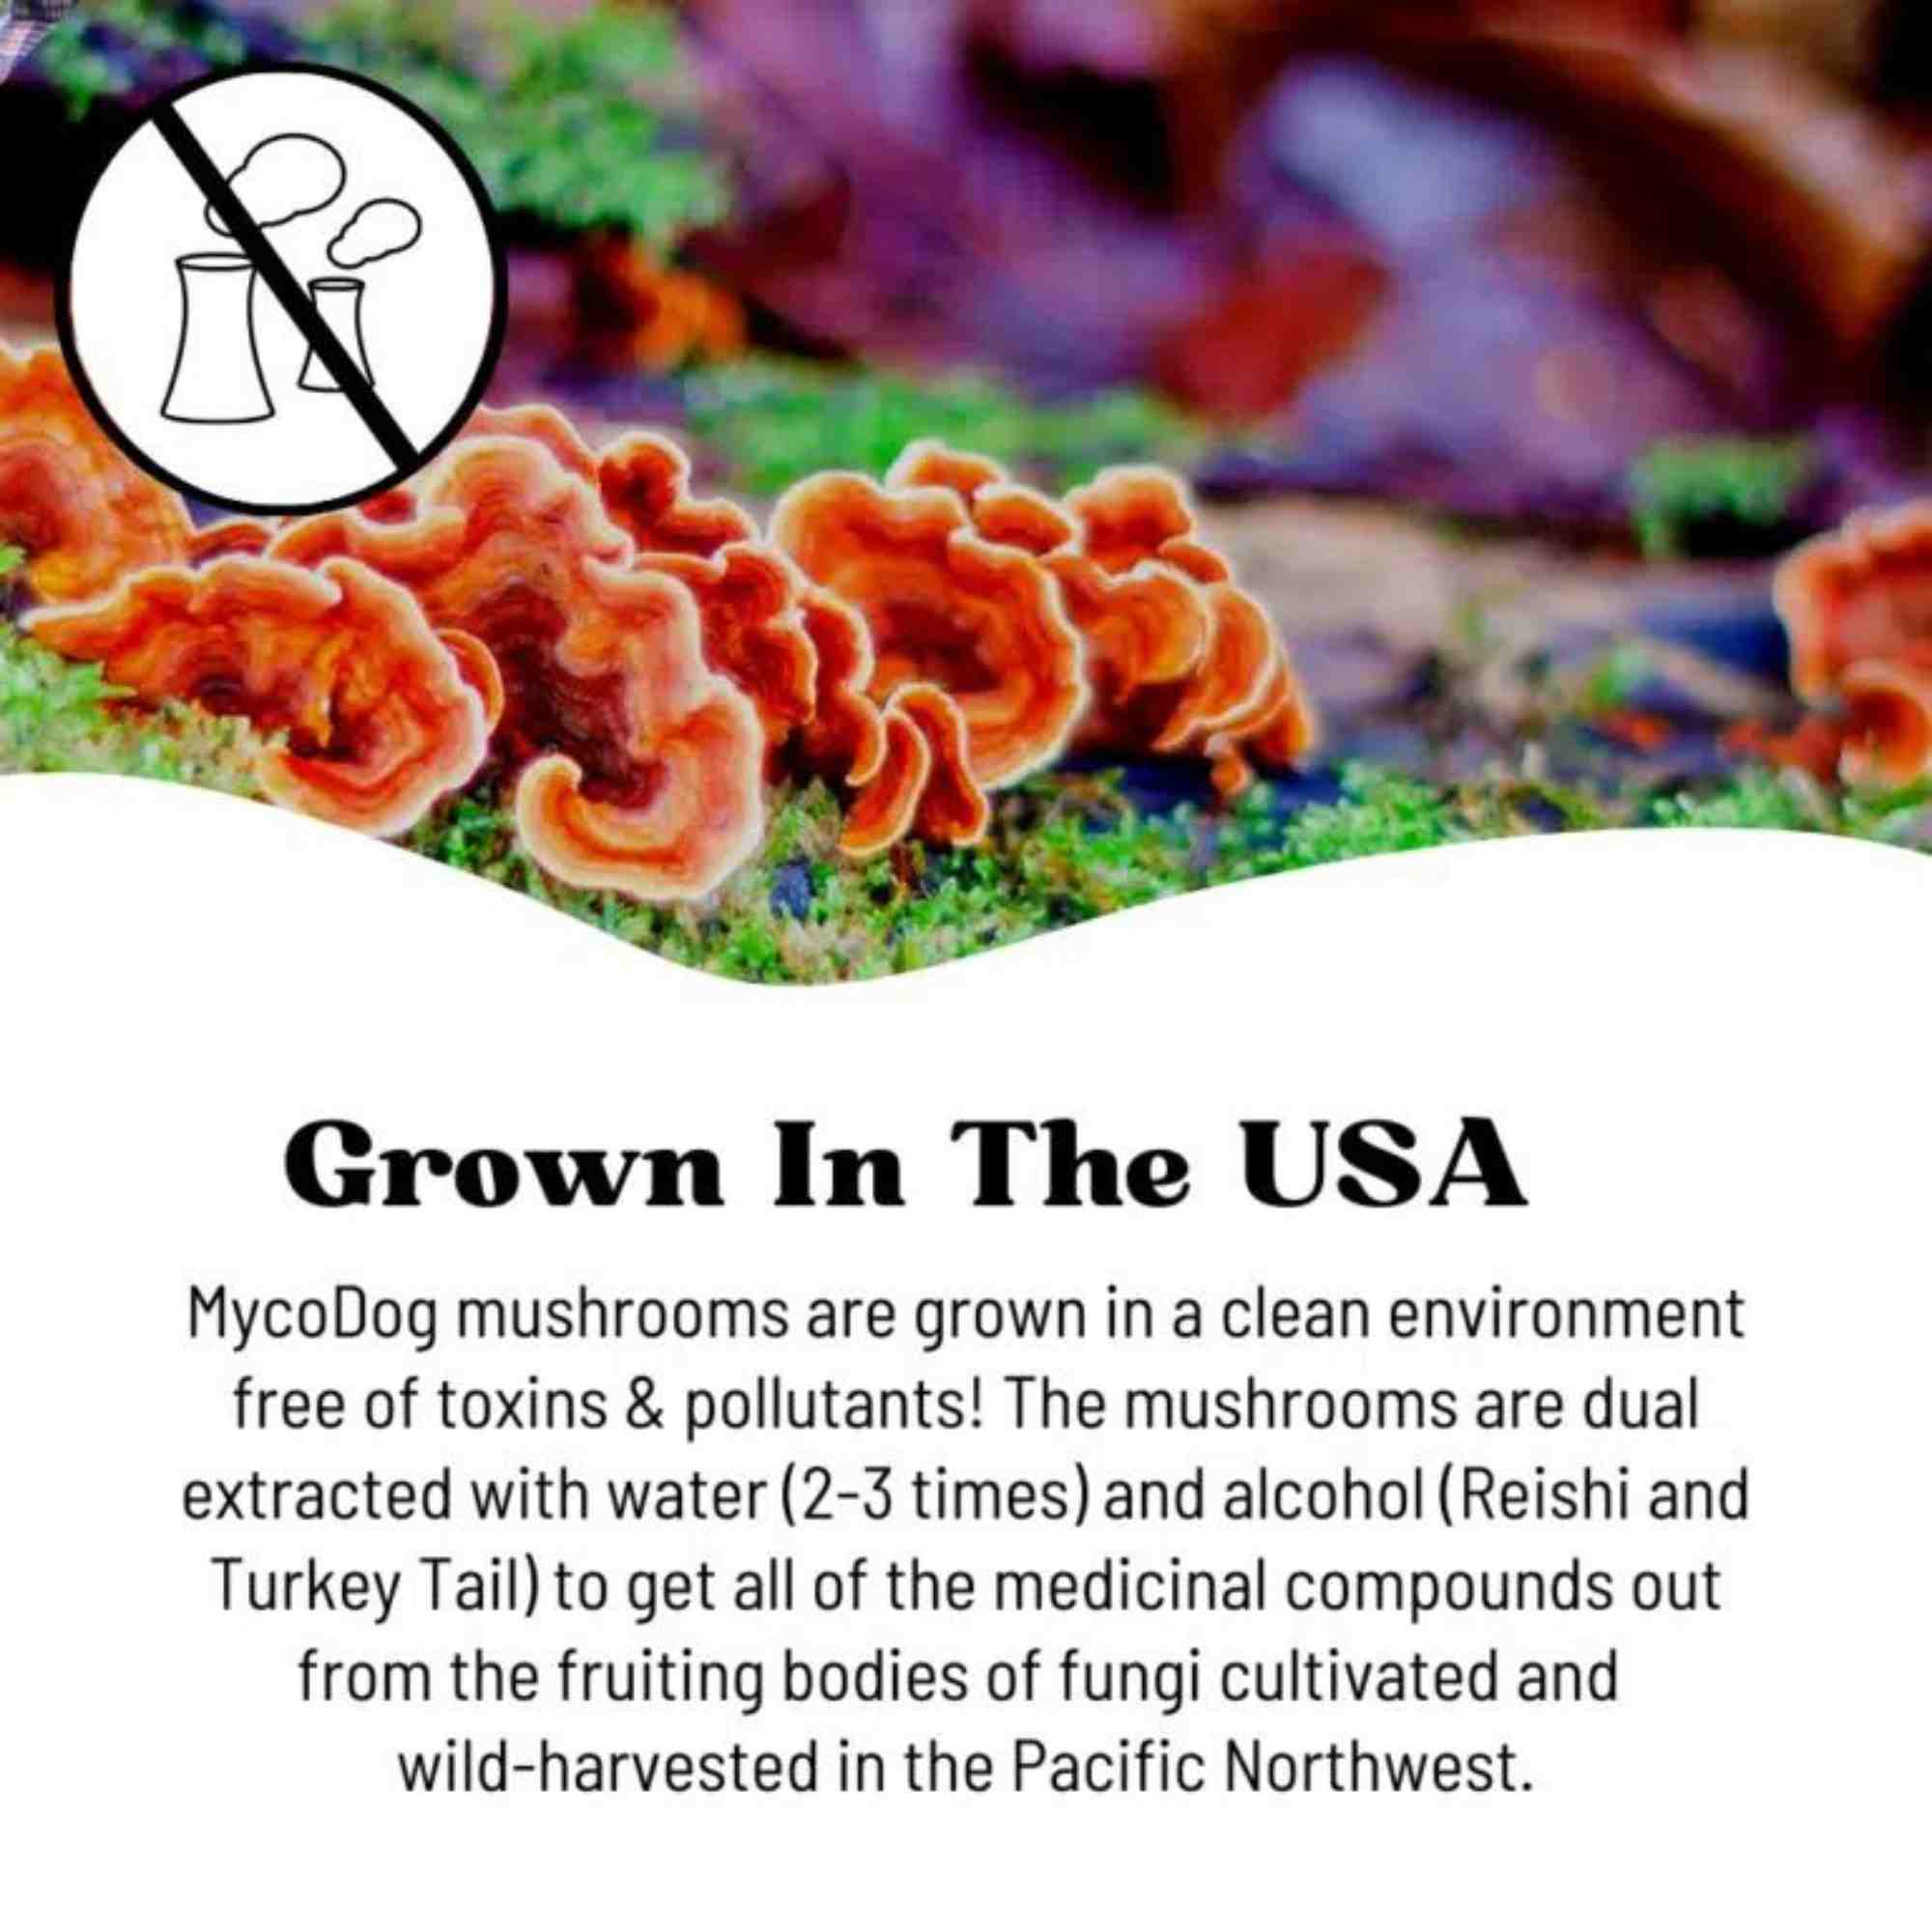 Breathe Mushrooms by mycodog - where is grown? in the USA